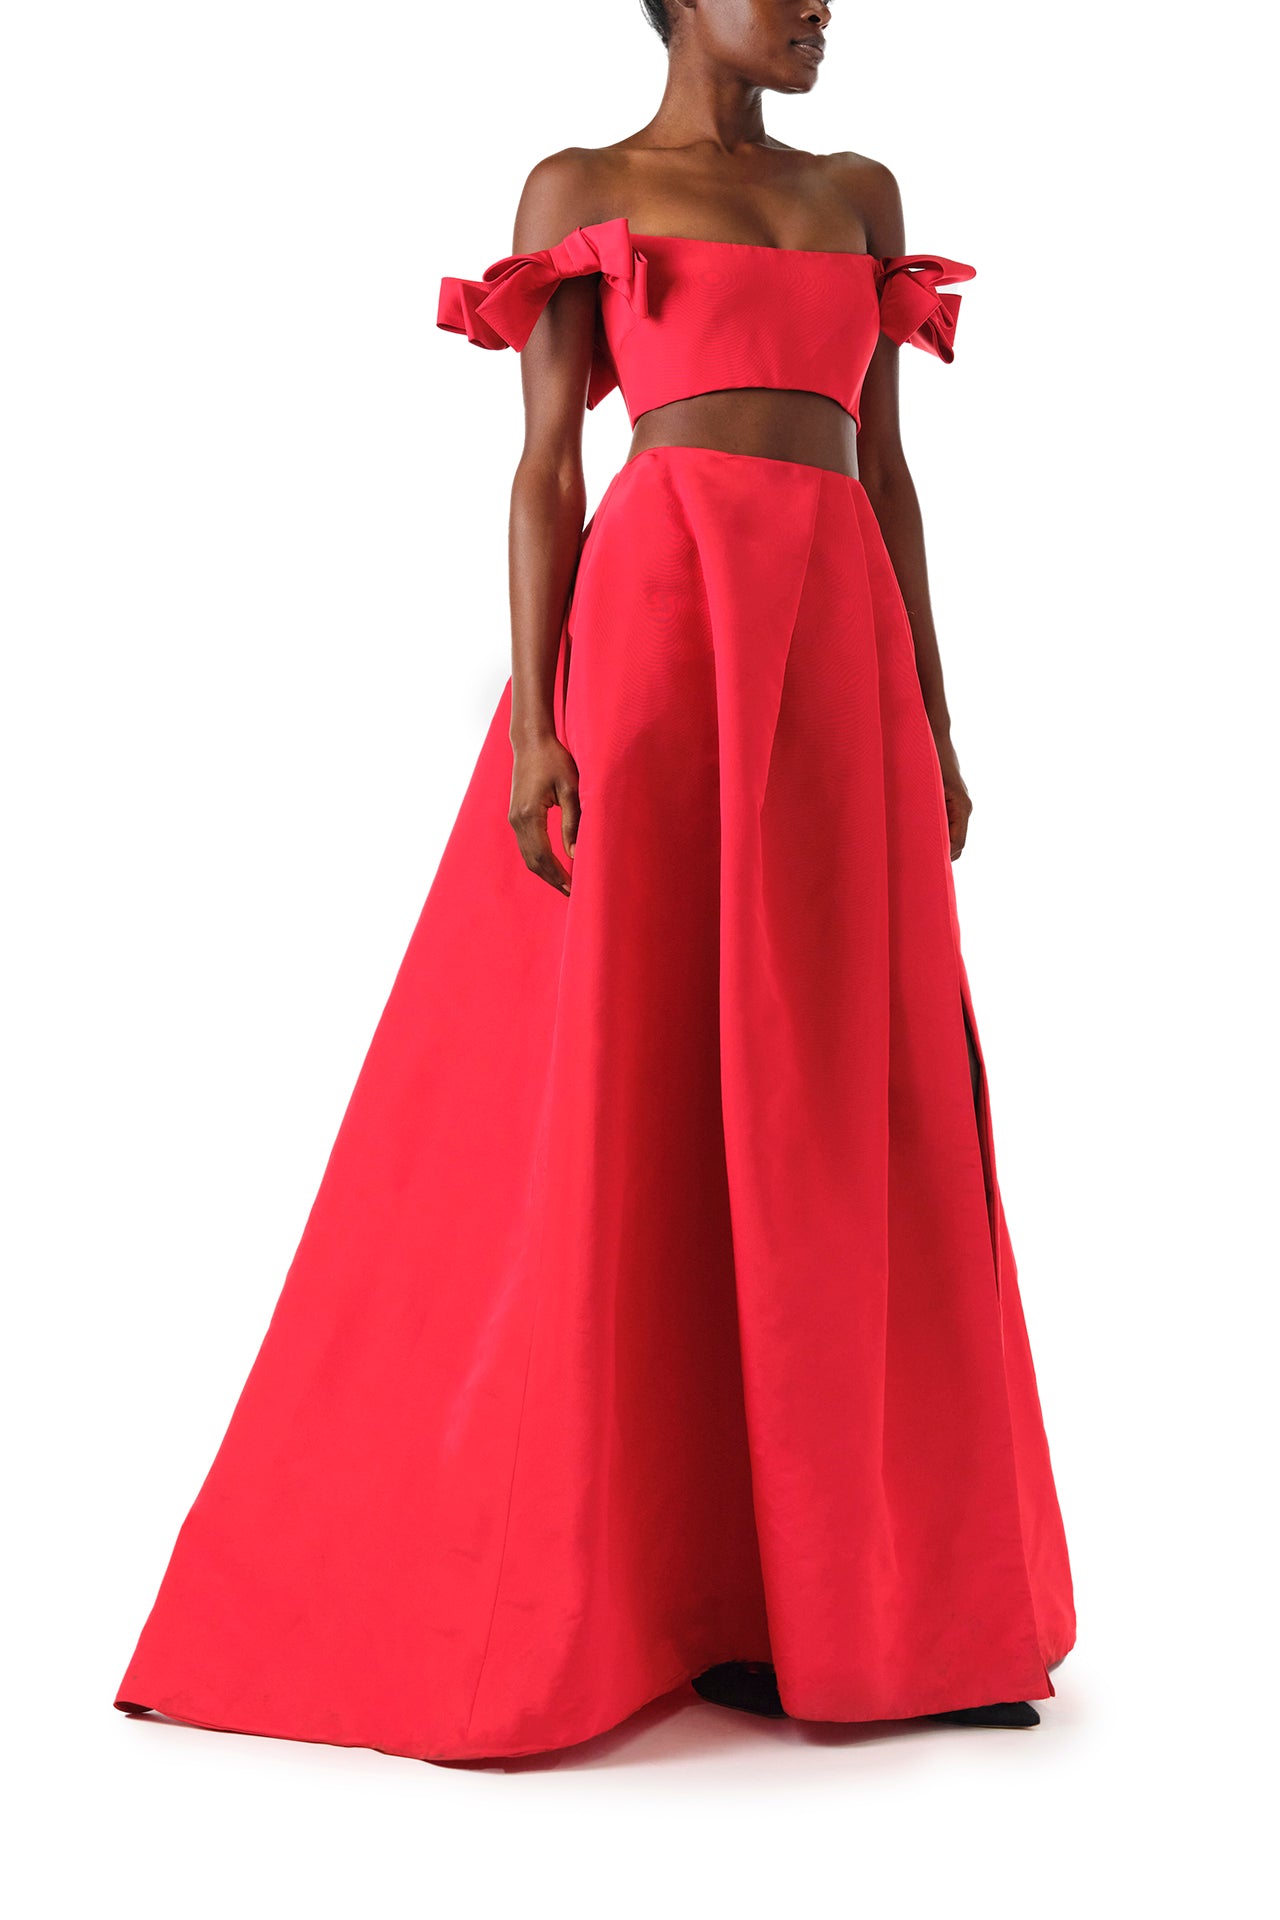 Monique Lhuillier Fall 2024 scarlet red faille pleated ballgown skirt with high front slit and pockets - side.